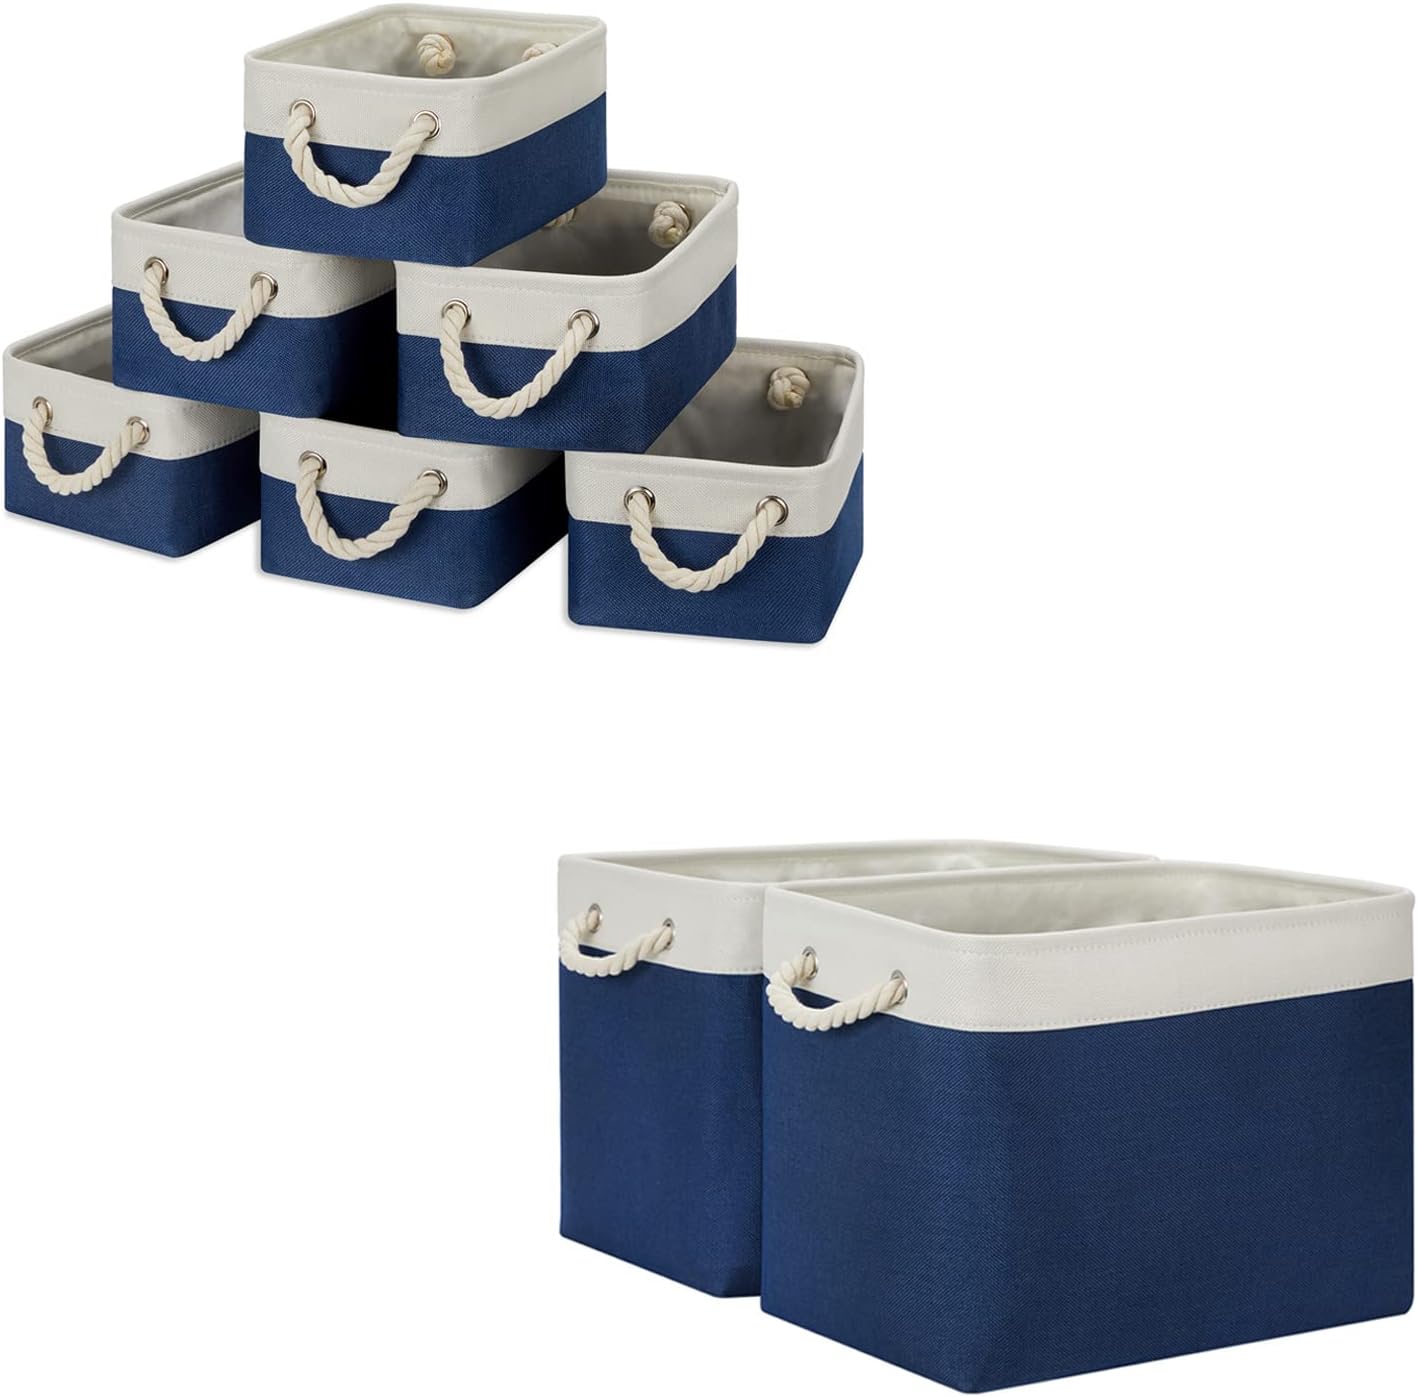 Temary 6 Pcs Small Storage Baskets for Shelves, 2 Pcs Fabric Storage Bins for Organizing Clothes, Toys, Books (White&Blue, 11.8Lx7.9Wx5.3H Inches, 16Lx12Wx12H Inches)